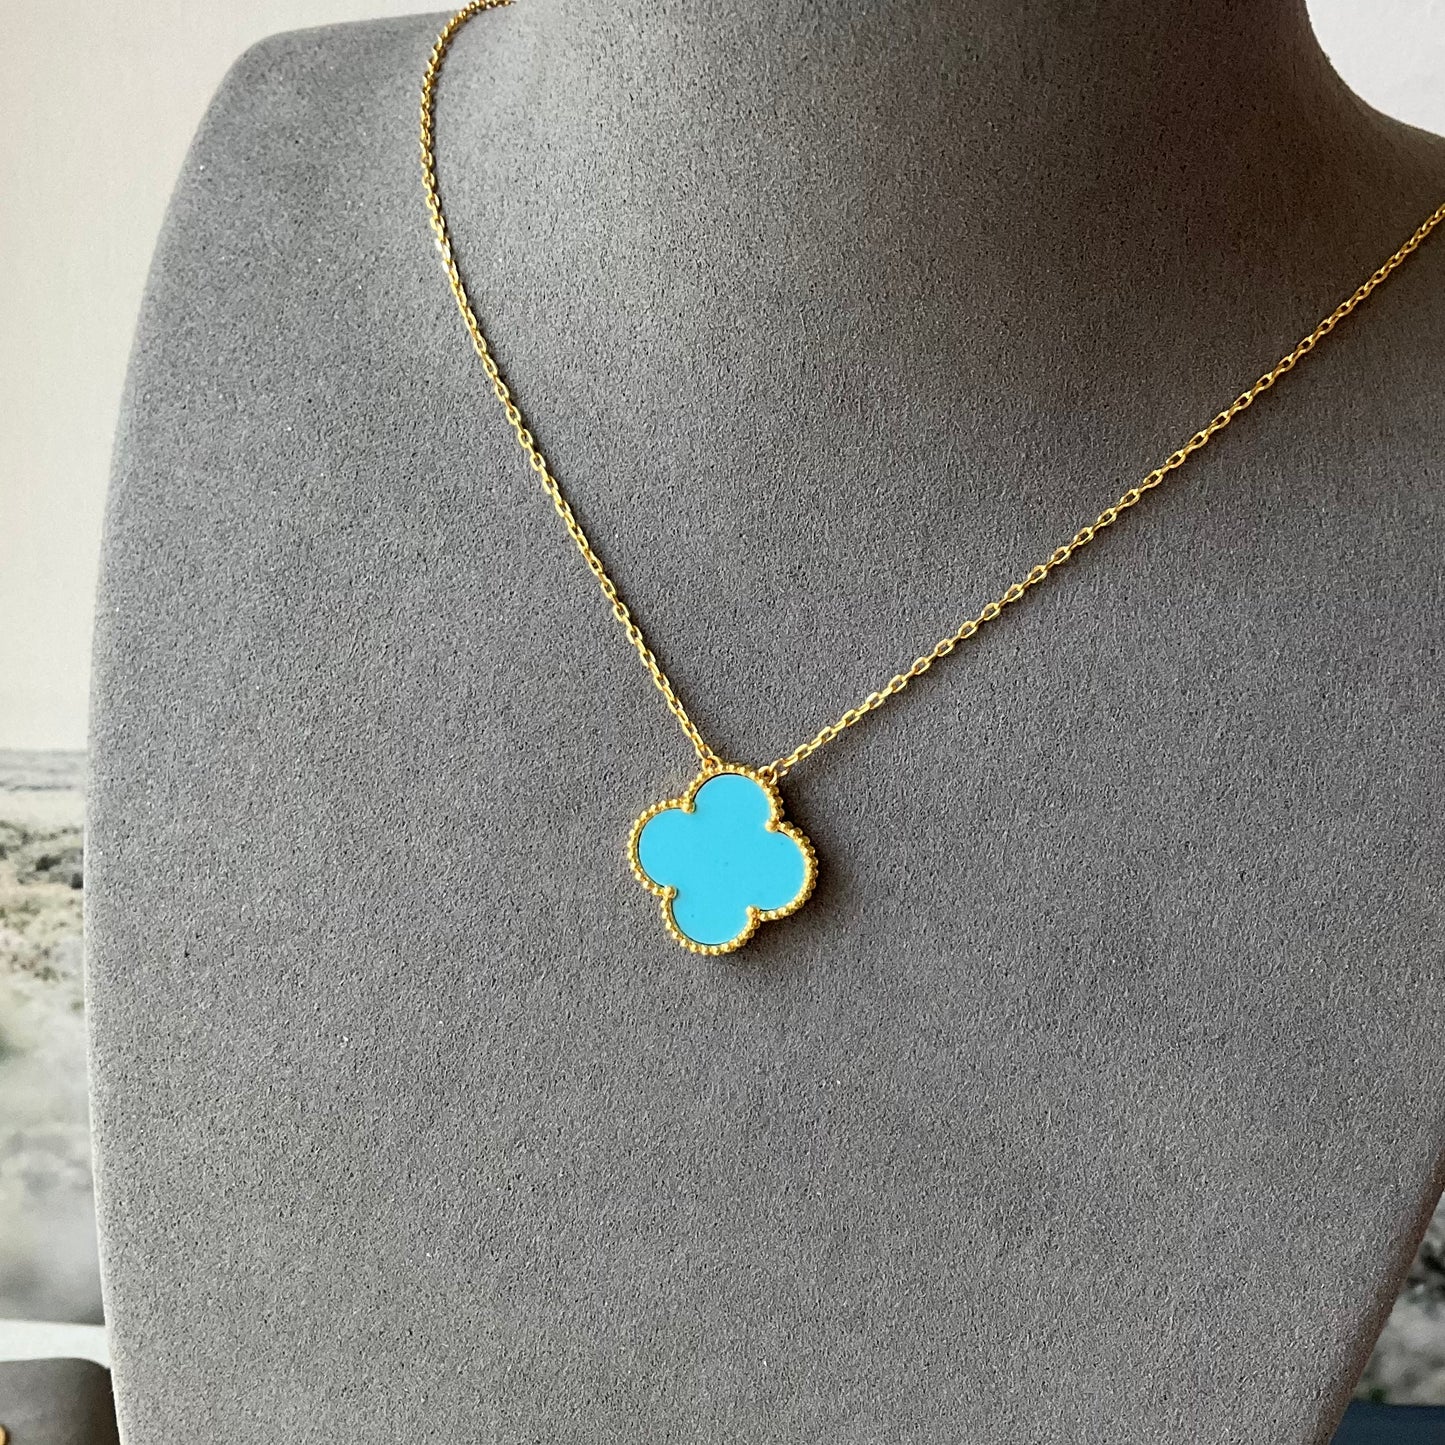 20mm Gemstone Clover Necklace, 18k Gold Plated, 925 Sterling Silver 42cm long